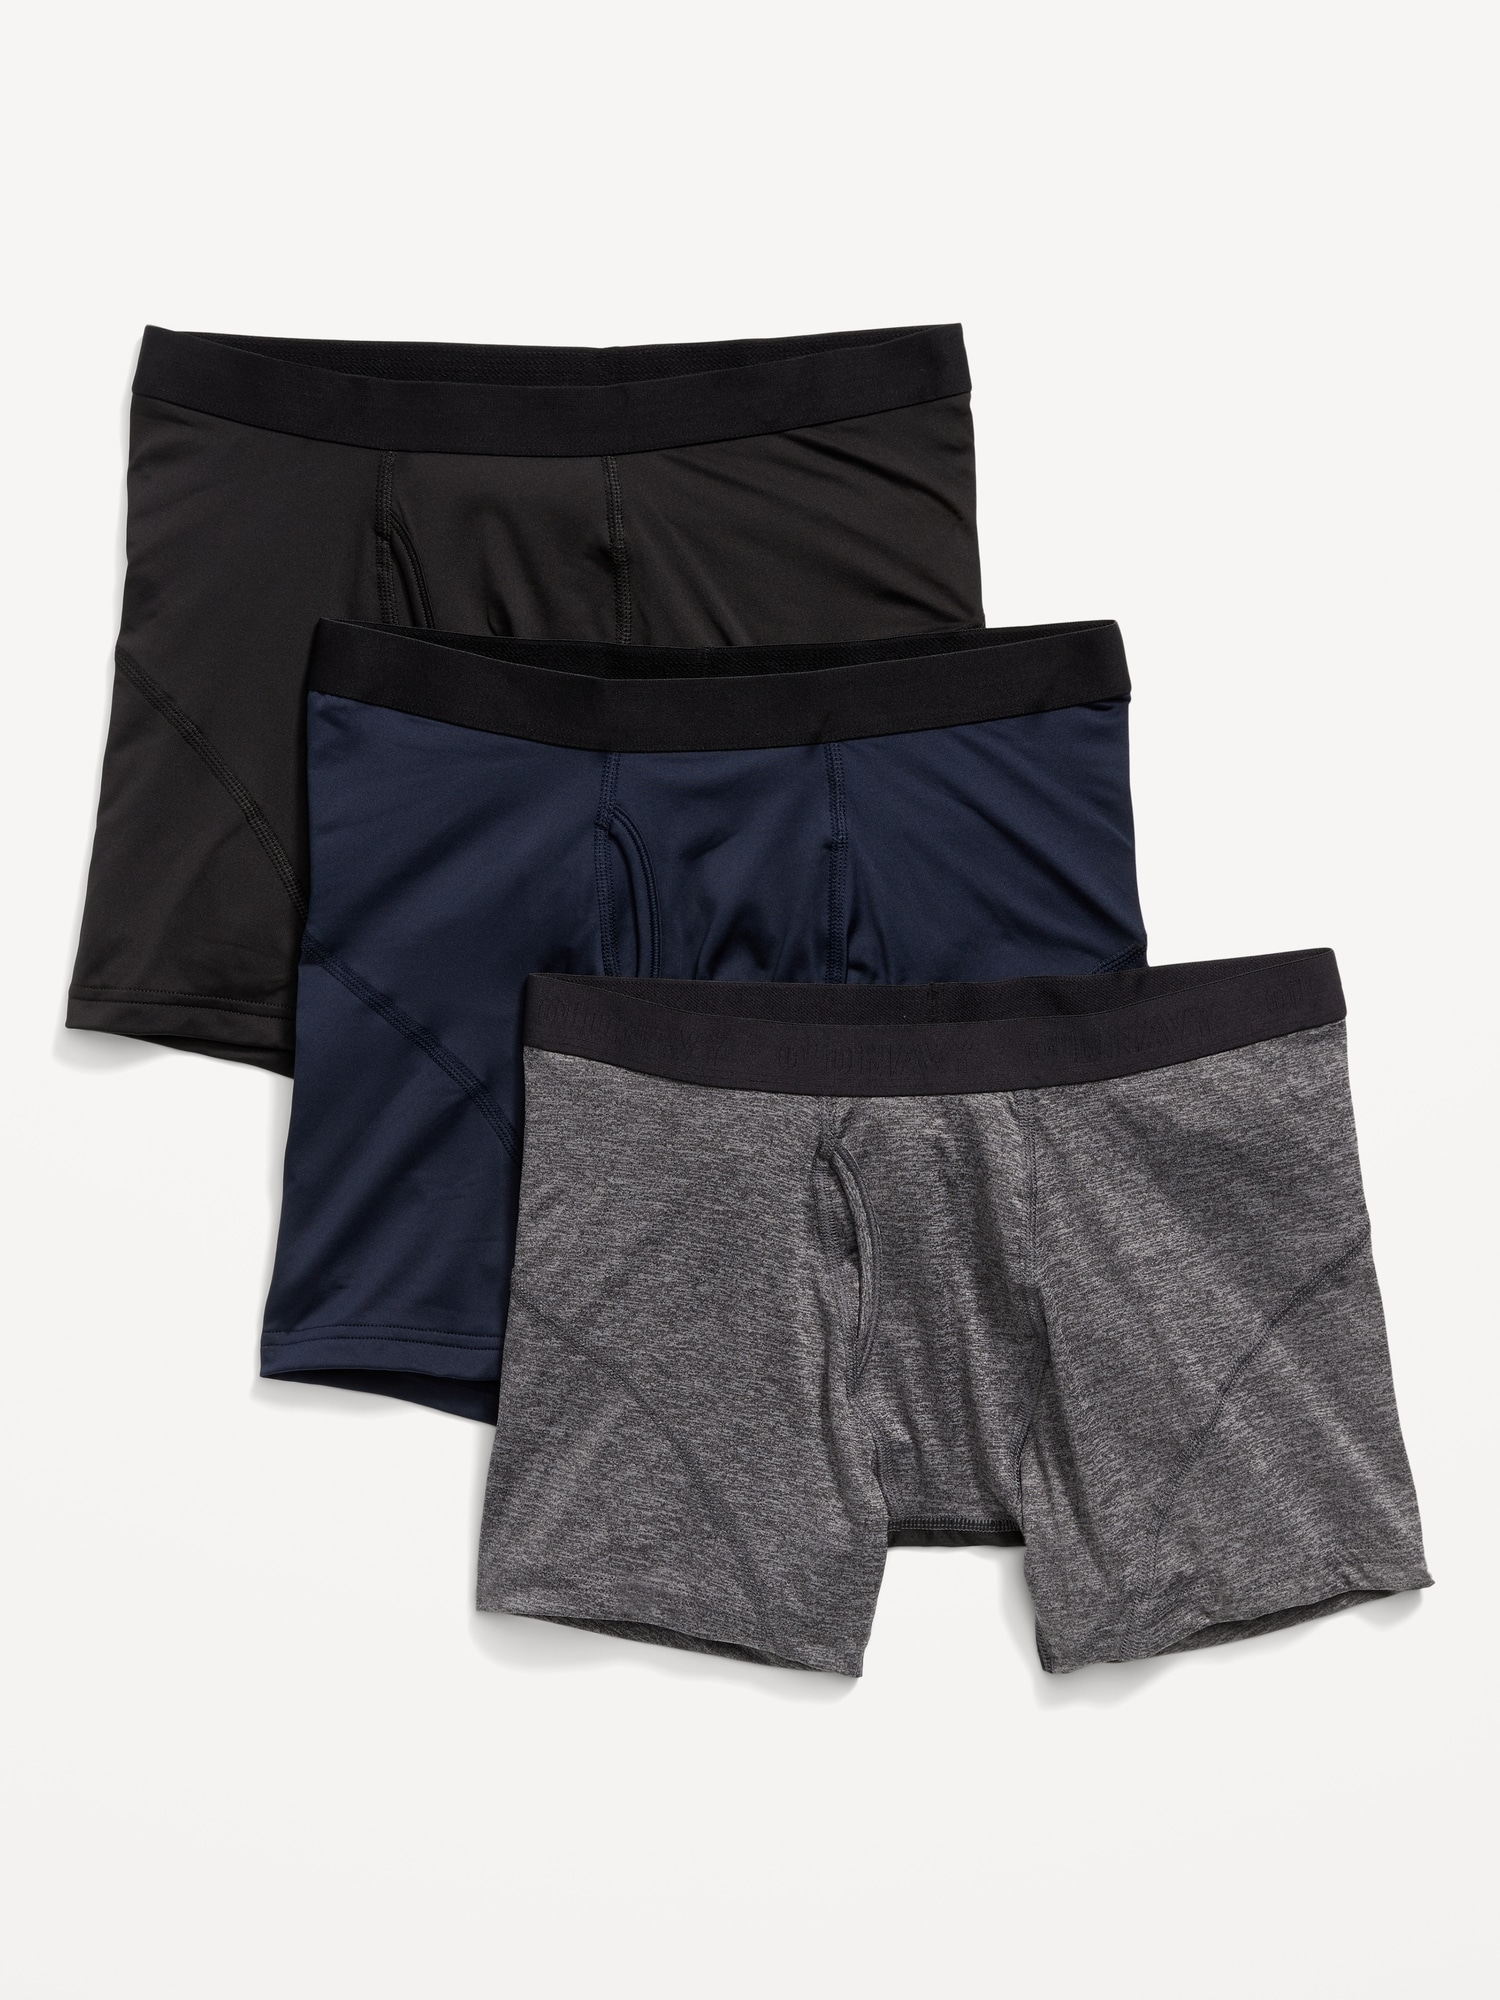 Old Navy Go-Dry Cool Performance Boxer-Briefs Underwear 3-Pack for Men -- 5-inch inseam multi. 1